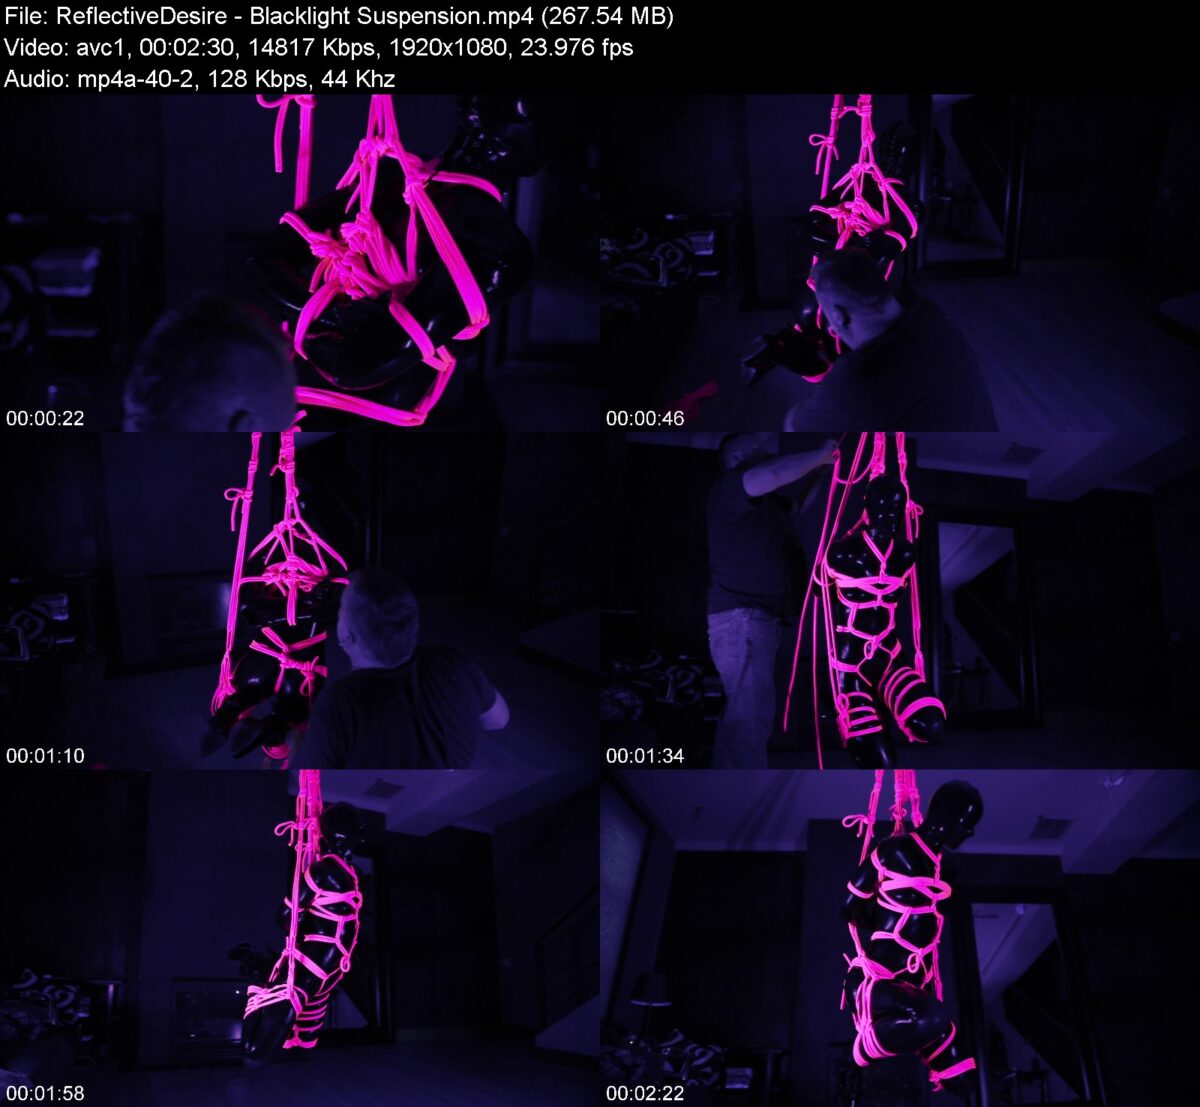 Actress: ReflectiveDesire. Title and Studio: Blacklight Suspension